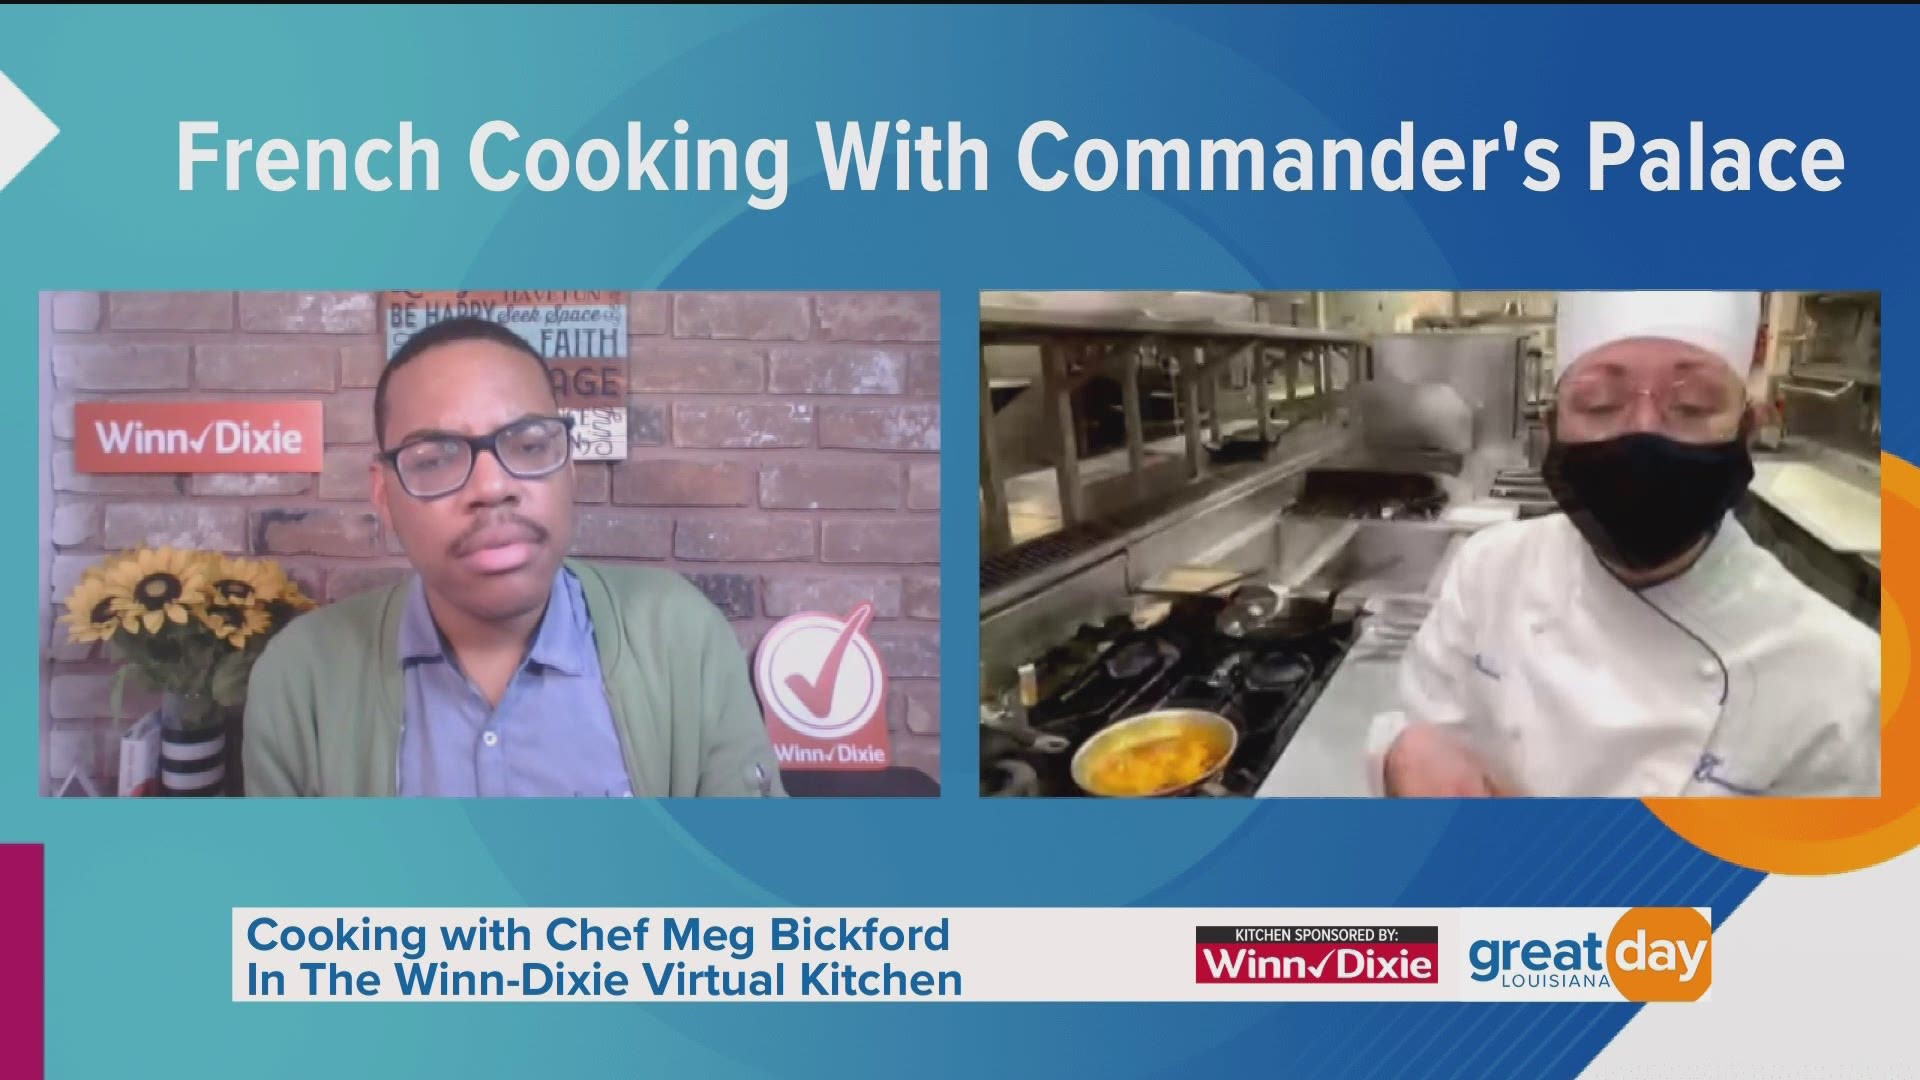 Chef Meg Bickford of "Commander's Palace" cooked a French-inspired dish in the Winn-Dixie virtual kitchen.